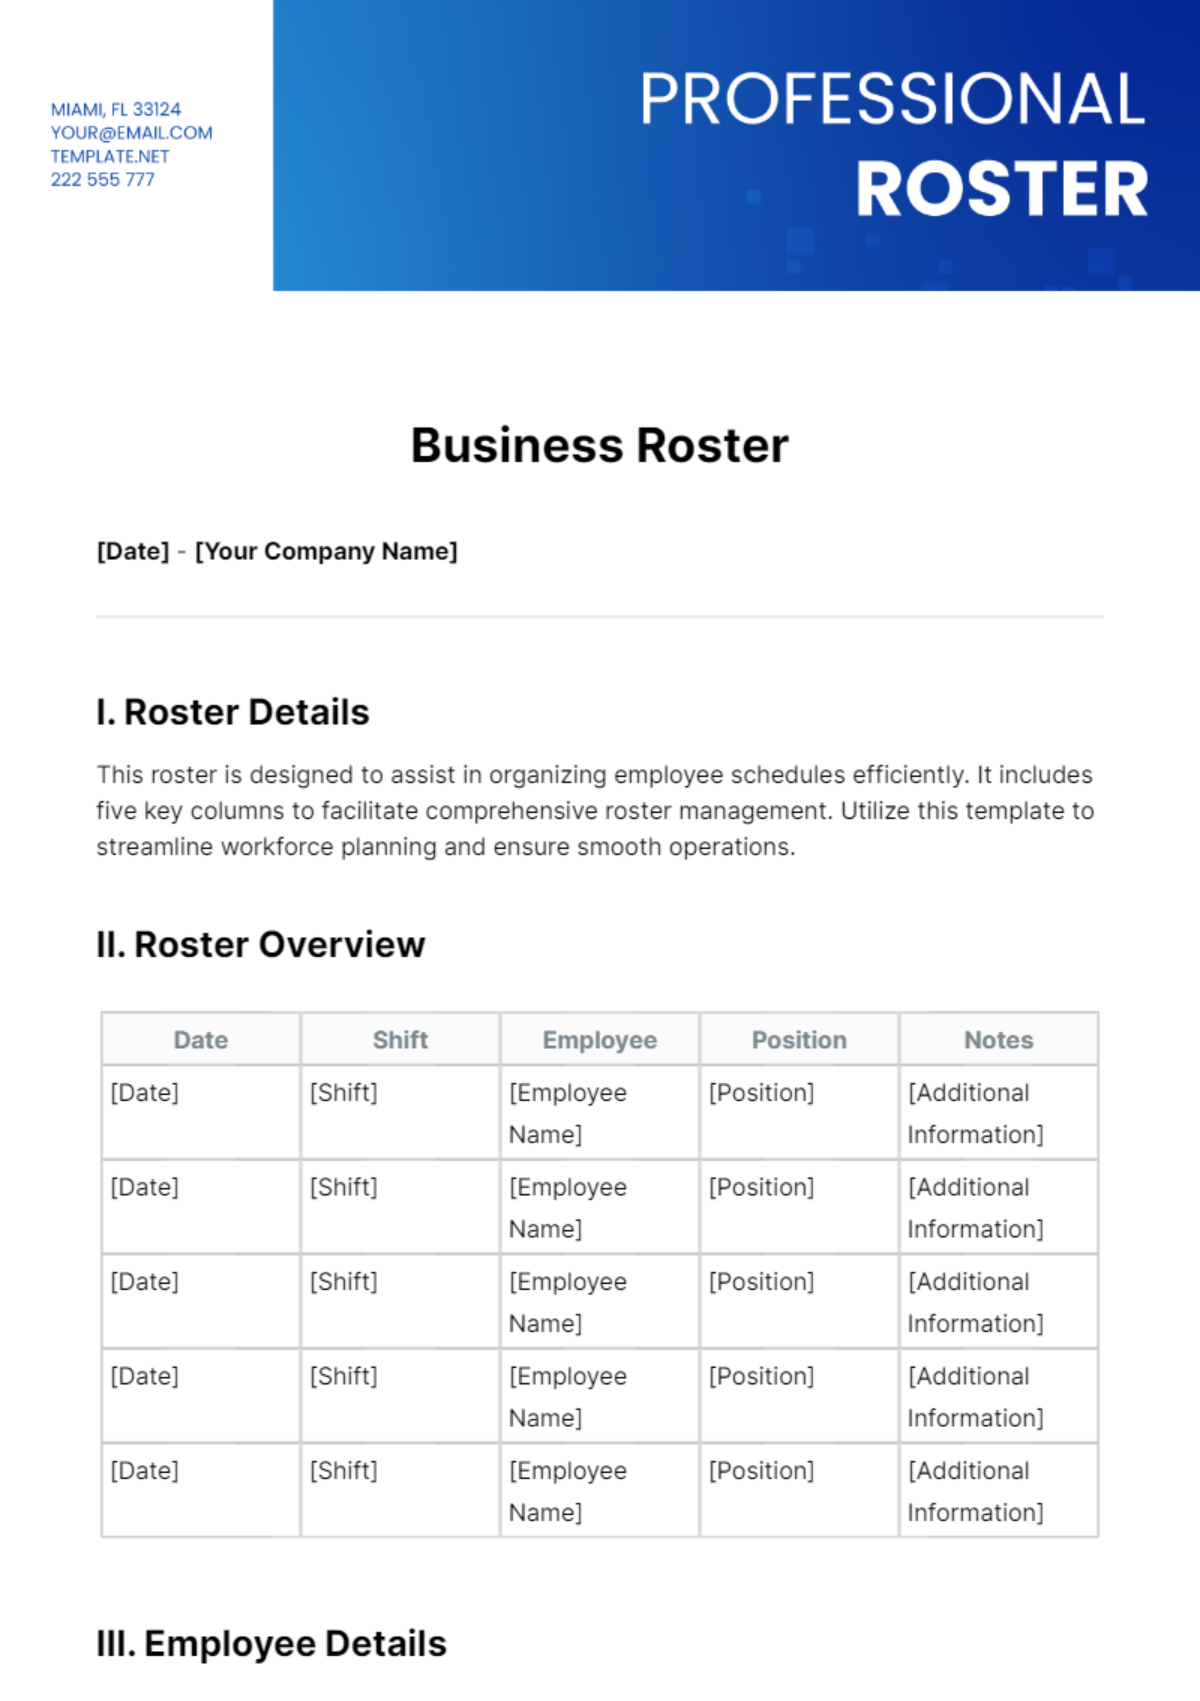 Business Roster Template